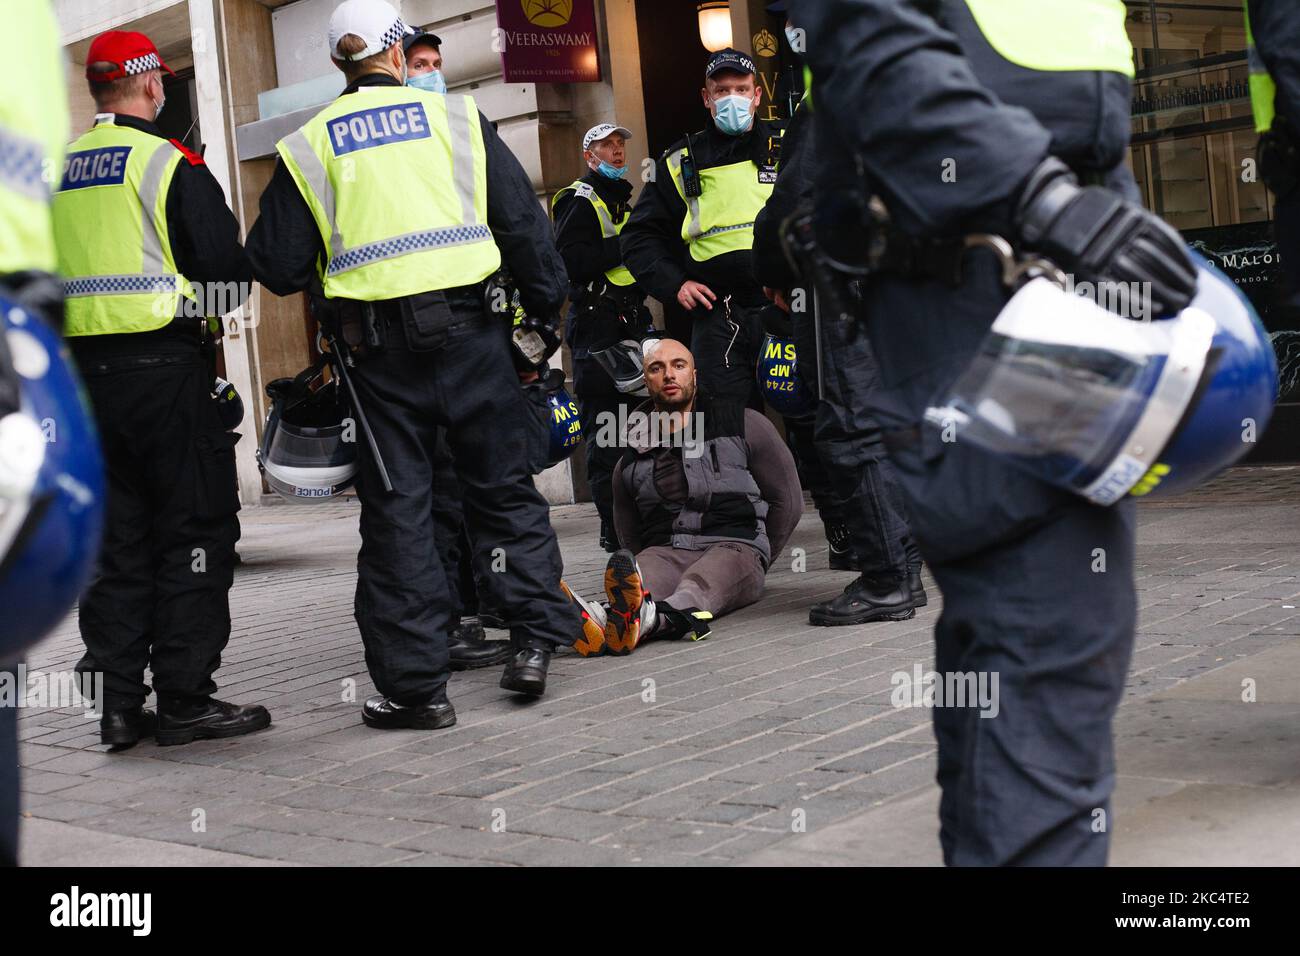 An arrested anti-lockdown activist waits to be transported away following scuffles with police officers on Regent Street in London, England, on November 28, 2020. In an evening update the Metropolitan Police announced it had made 155 arrests over the course of the day's demonstrations, for offences including breaches of coronavirus regulations, assault on police and possession of drugs. London is to return to 'Tier 2' or 'high alert' covid-19 restrictions once the current England-wide coronavirus lockdown ends next Wednesday. All three of the tiers, assigned to local authorities across England Stock Photo